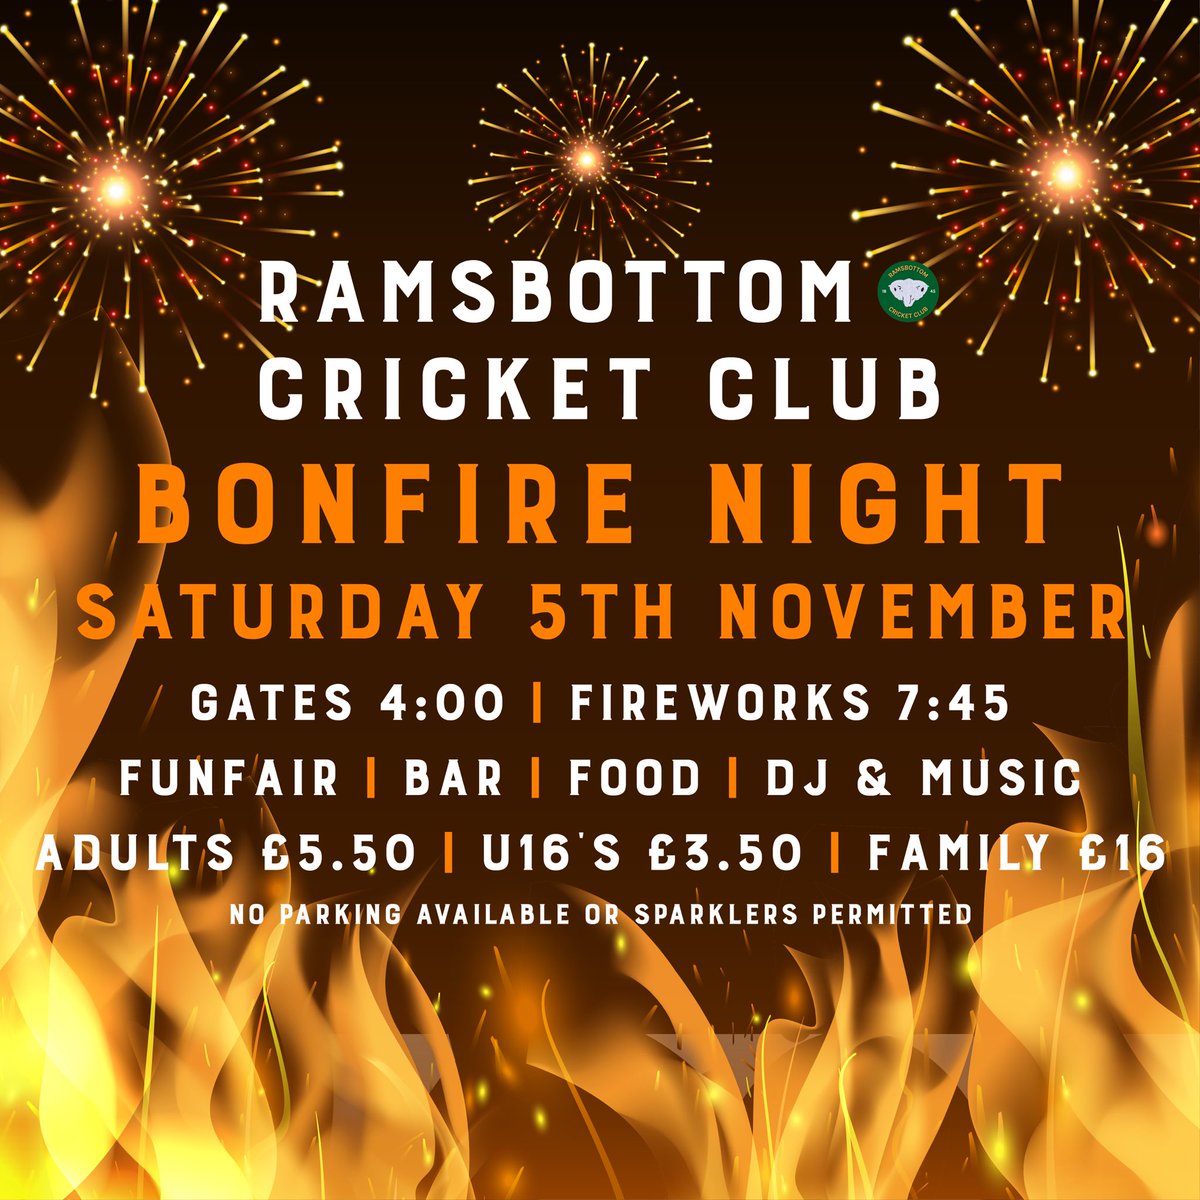 TICKETS ARE NOW ON SALE FOR BONFIRE NIGHT 🎆🎇🔥🔥 Follow the link to buy your tickets. Limited numbers so don’t miss out. Bonfire, fireworks, funfair, music and more 💛💚💛💚 tickettailor.com/events/ramsbot…